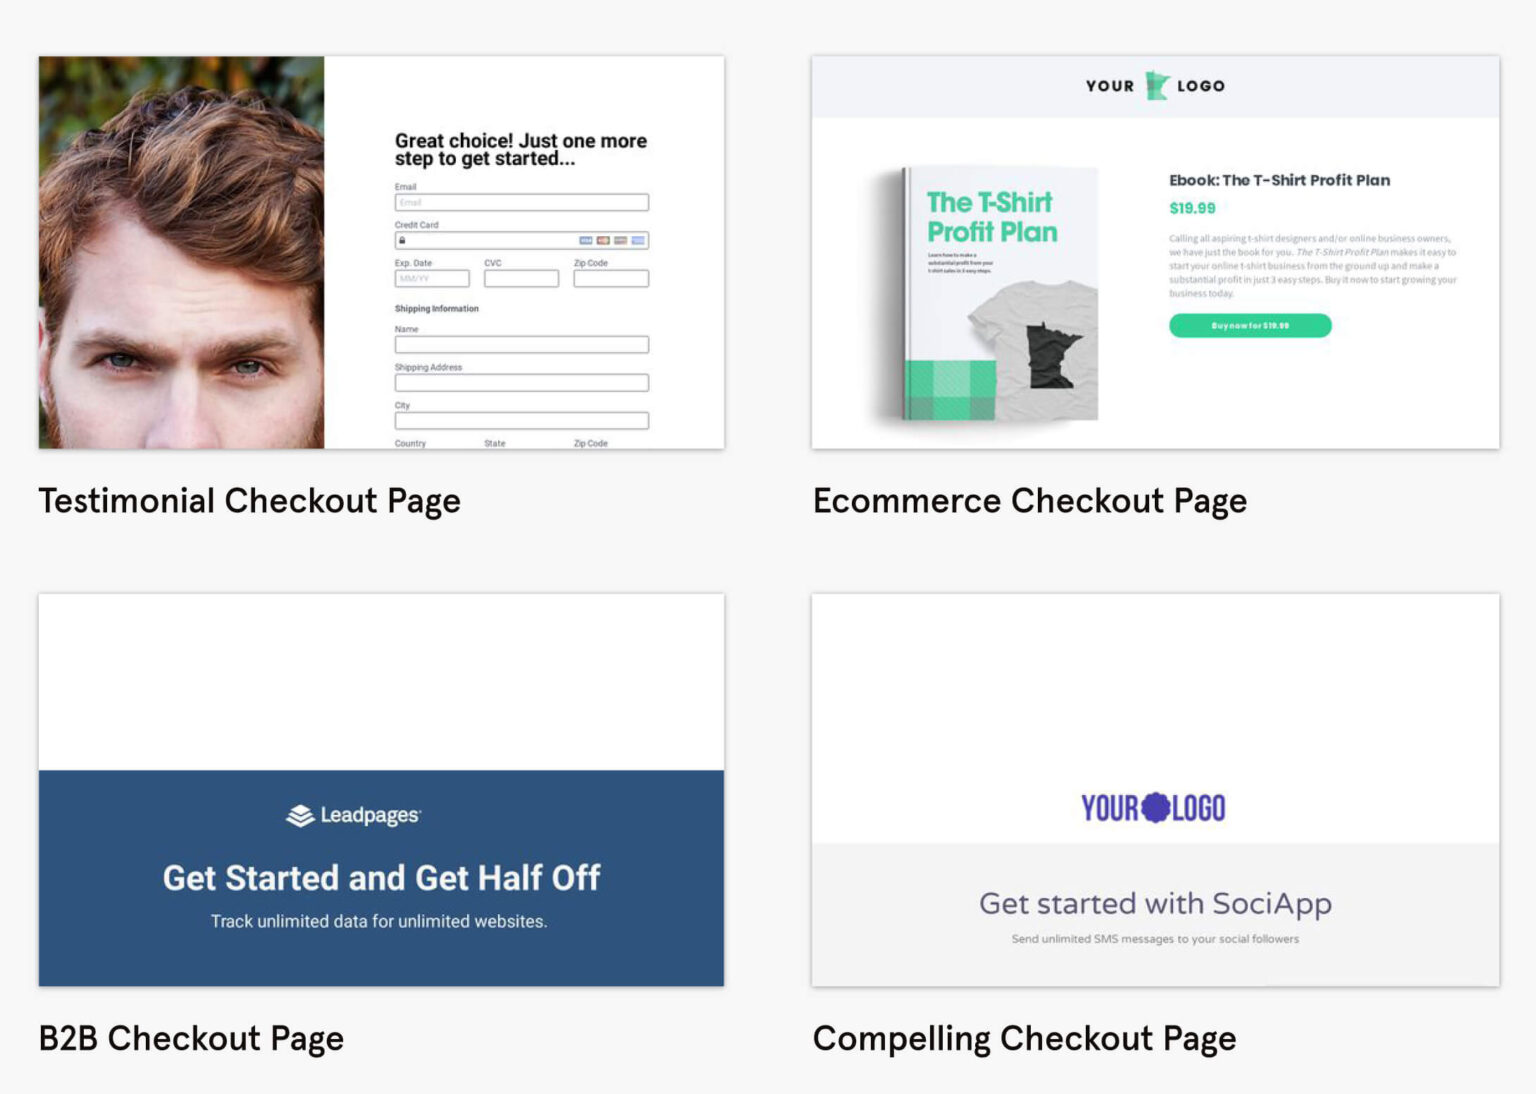 leadpages18-2023-1536x1094